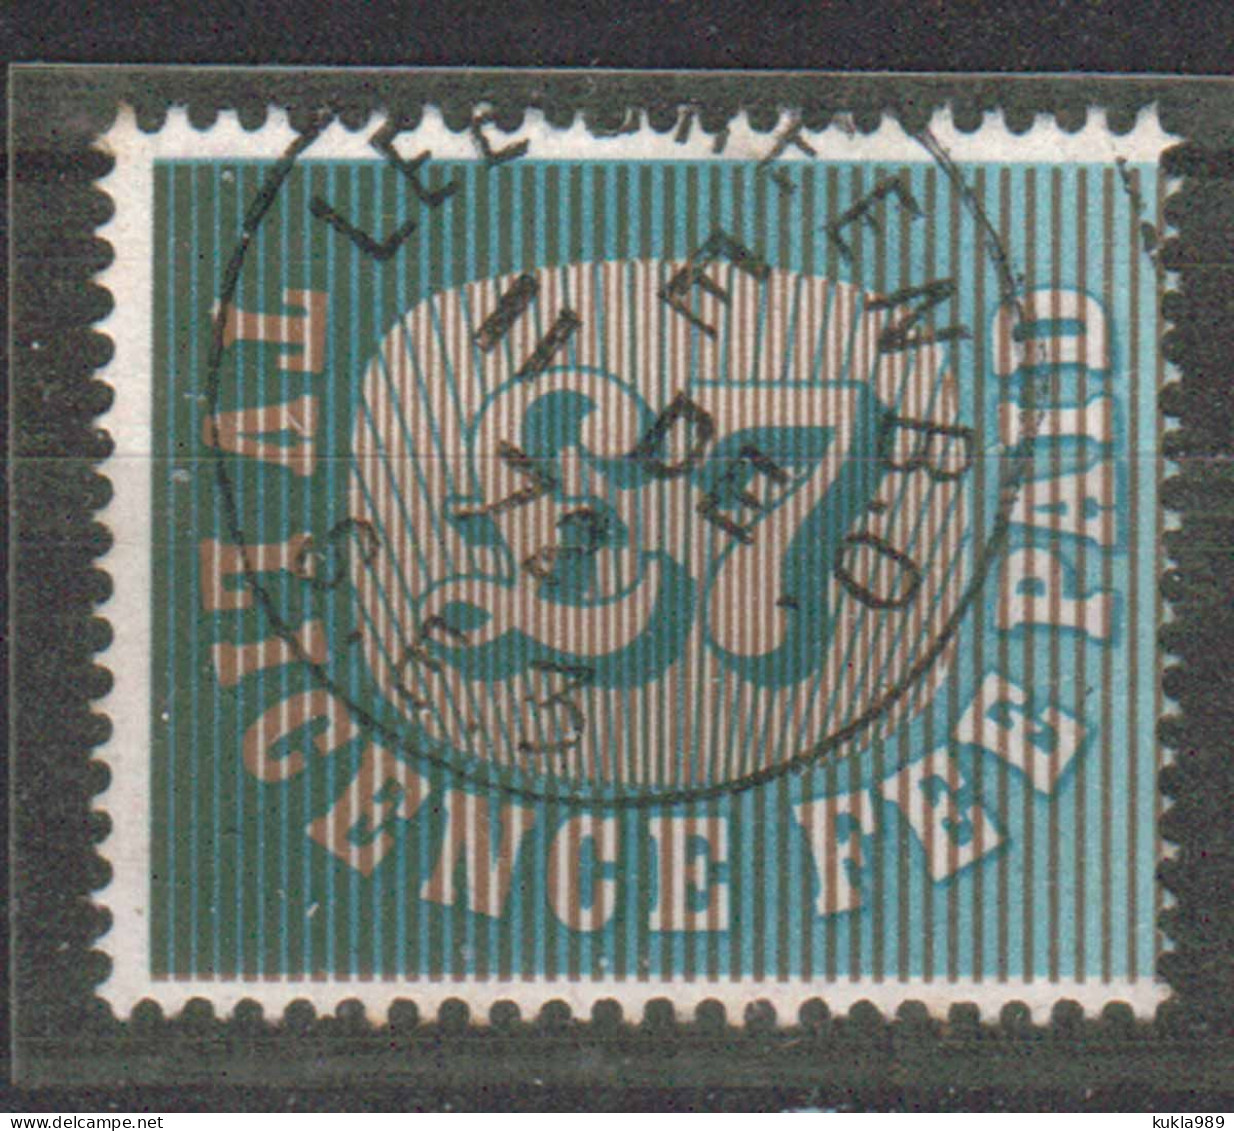 GB STAMP REVENUE TAX TV LICENCE FEE PAID, 1970s, USED - Revenue Stamps